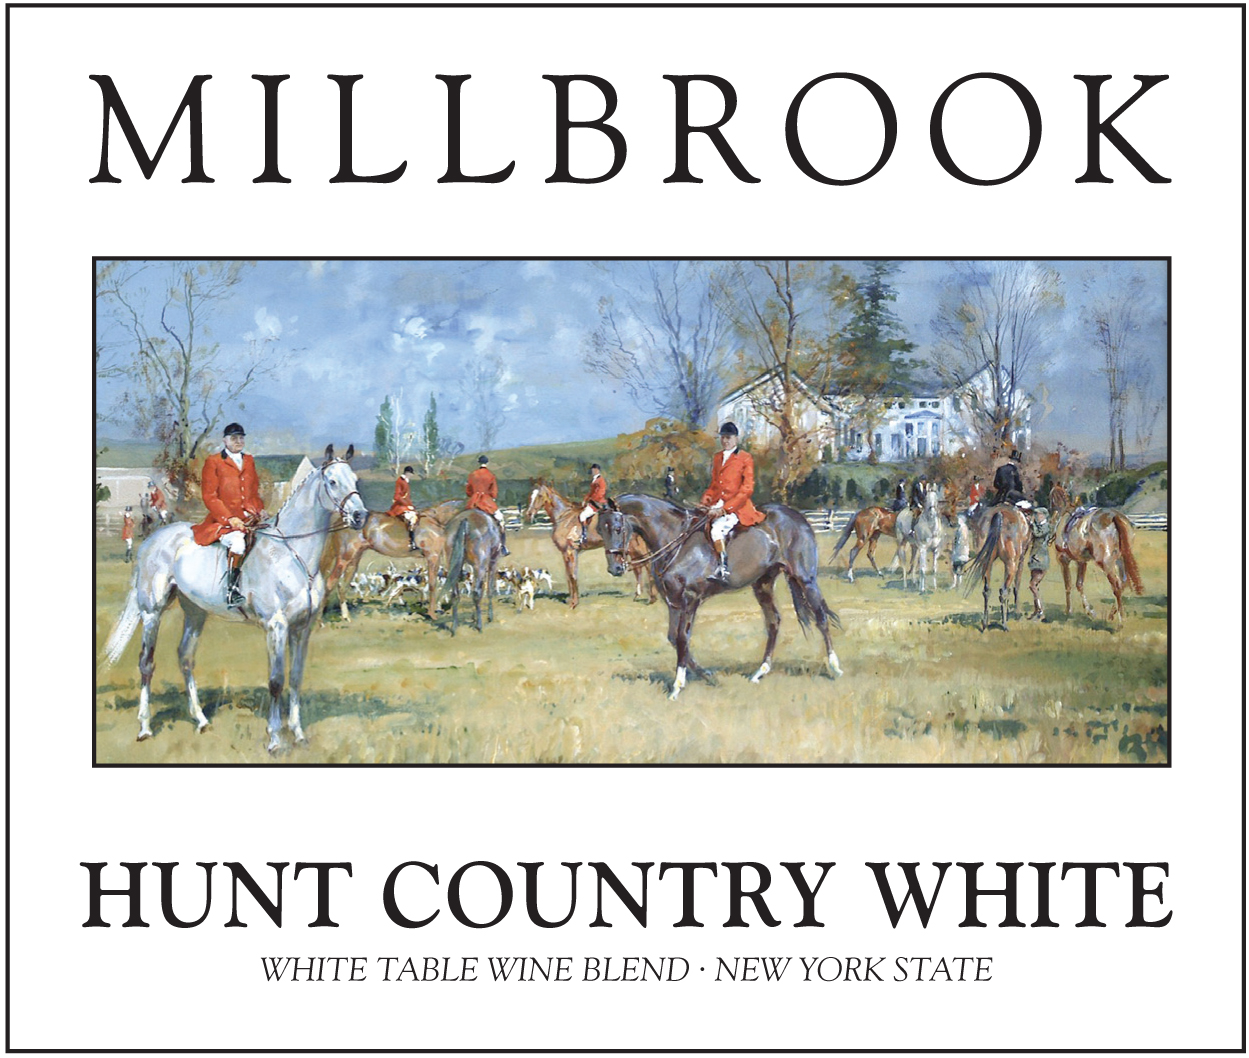 millbrook hunt country white